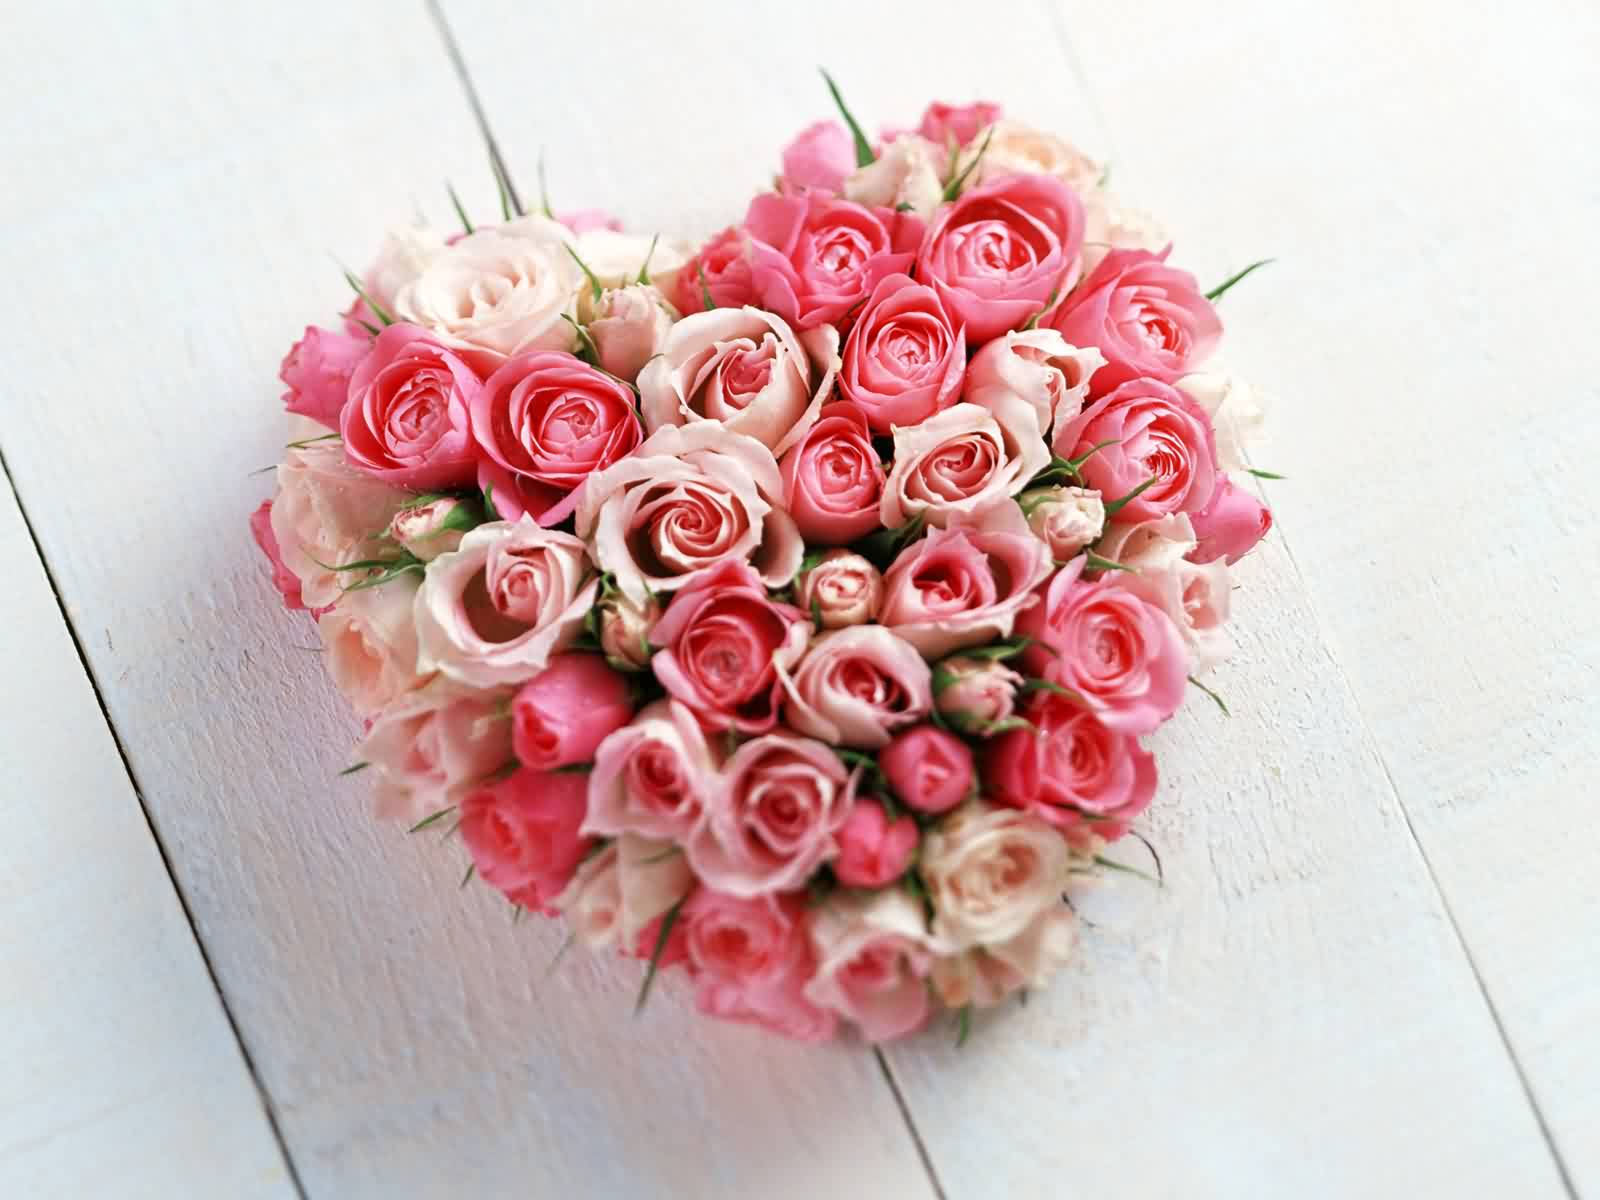 Valentines Day Flowers - HD Wallpaper 